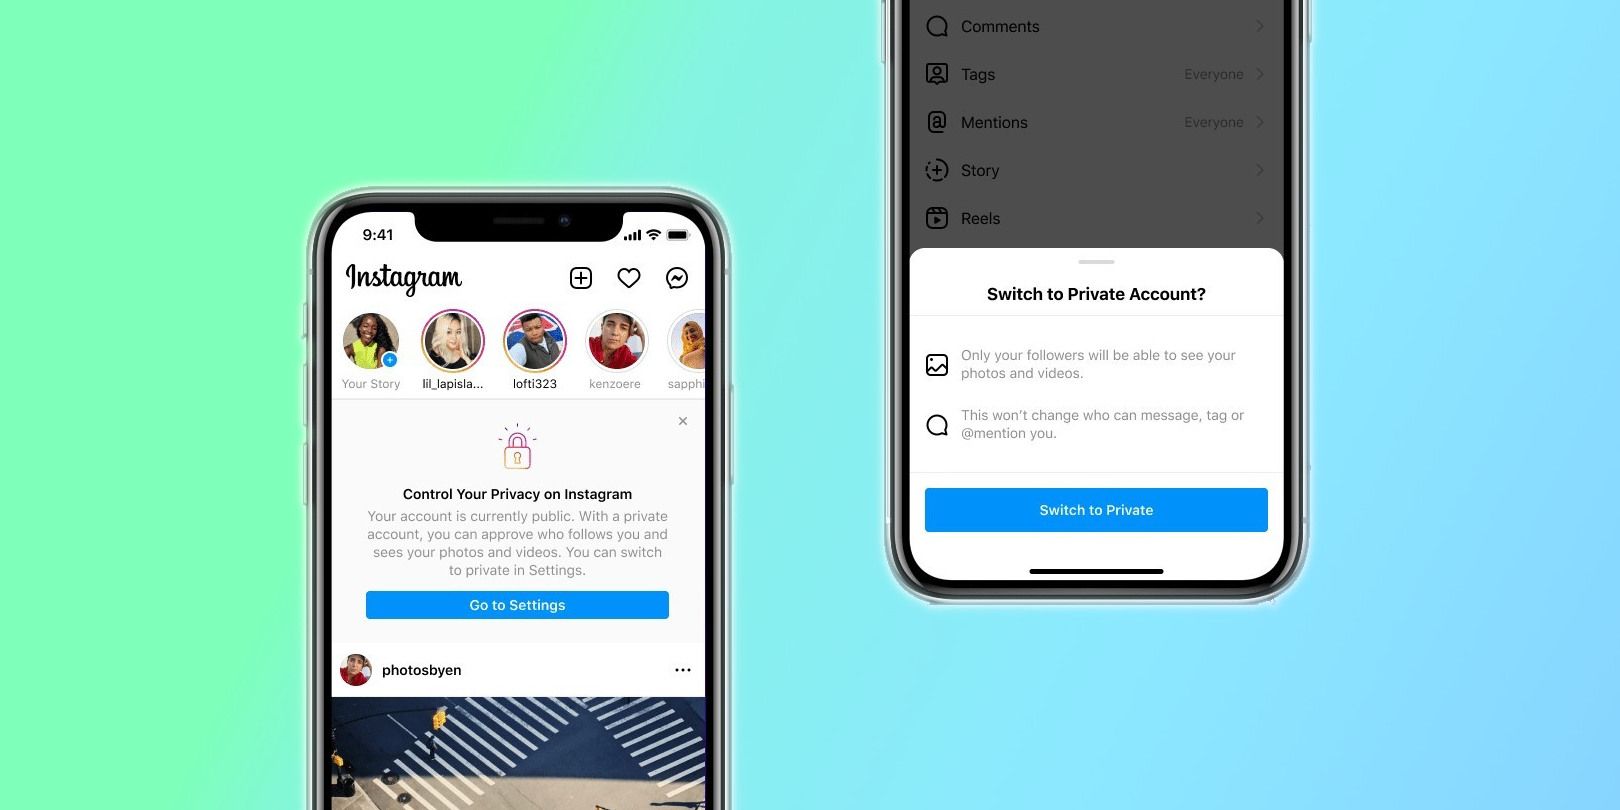 Instagram Introduces Account Safety Changes To Protect Its Teenage Users